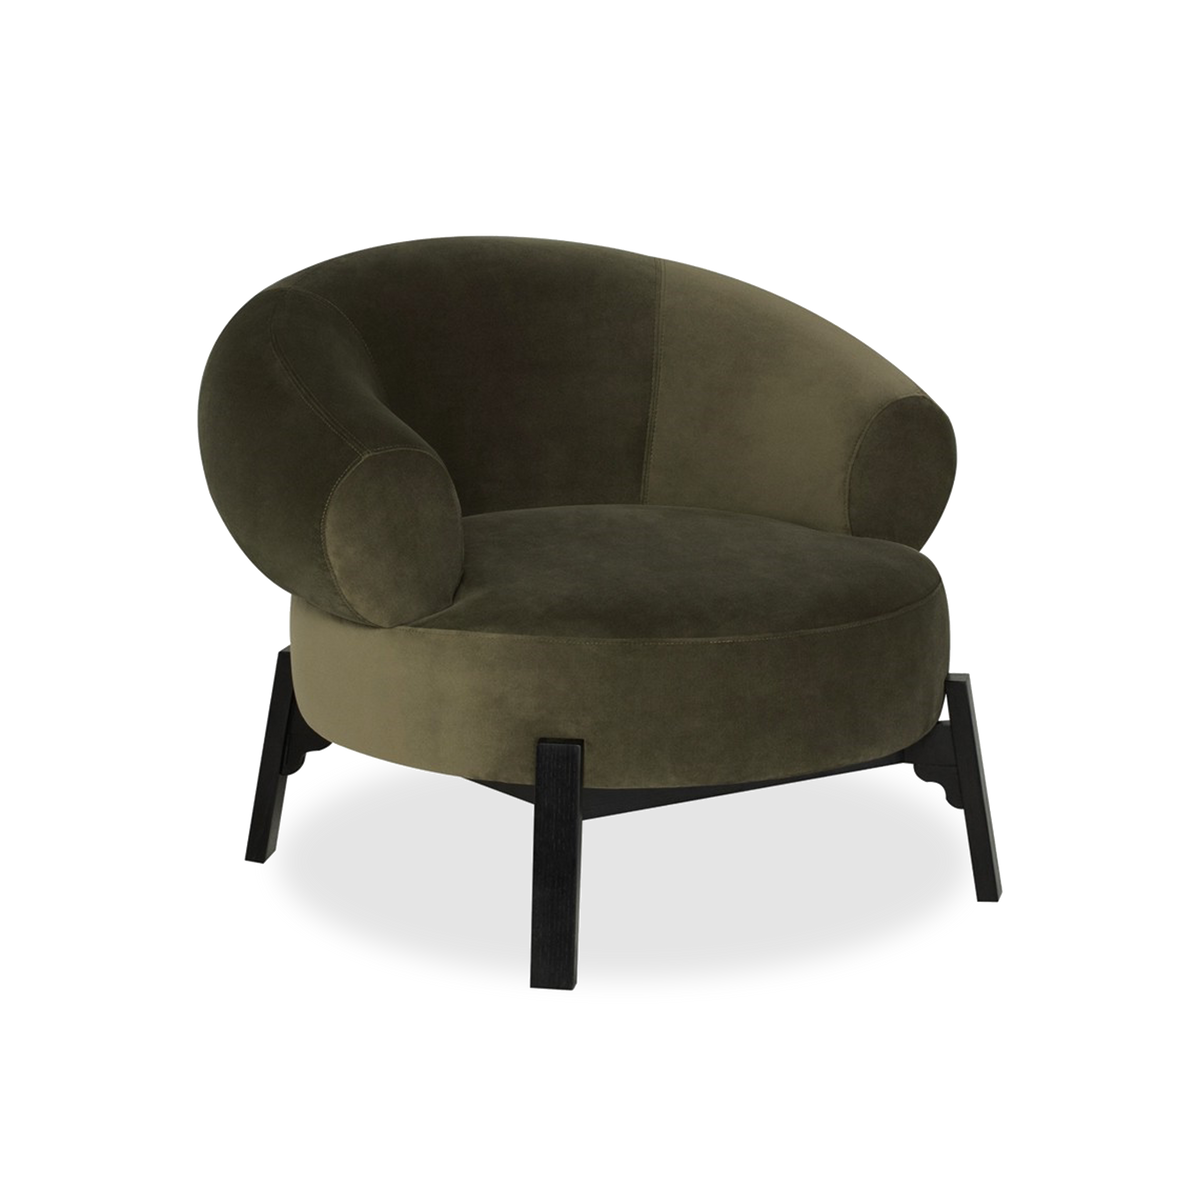 Sink into comfort with the beautifully curved Barclay Lounge Chair.